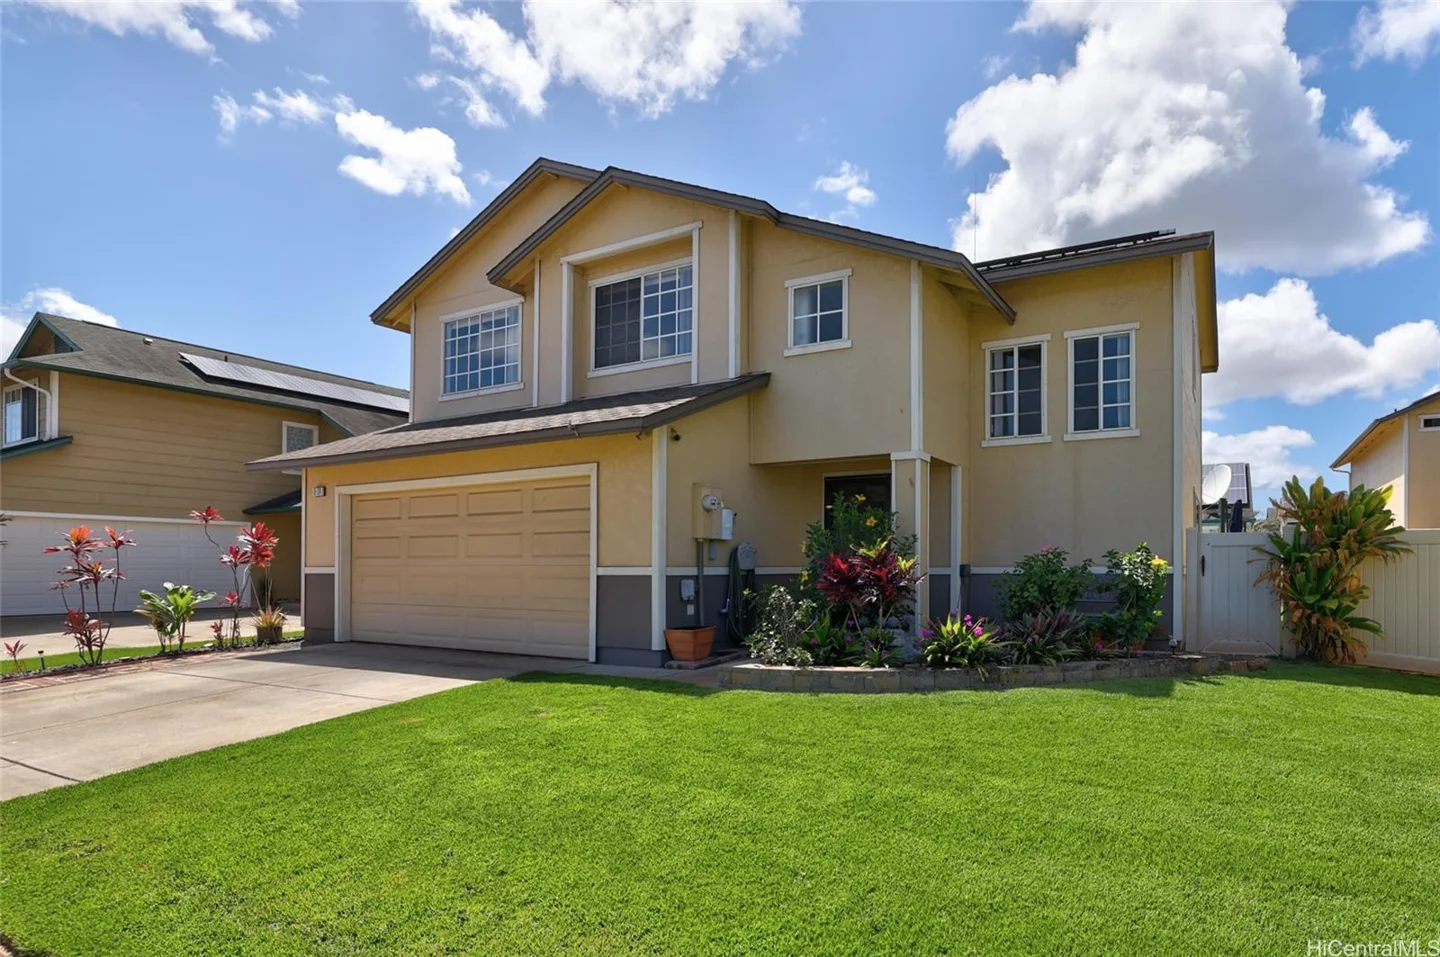 Energy Efficient, Well-Maintained Home In Ewa Gentry